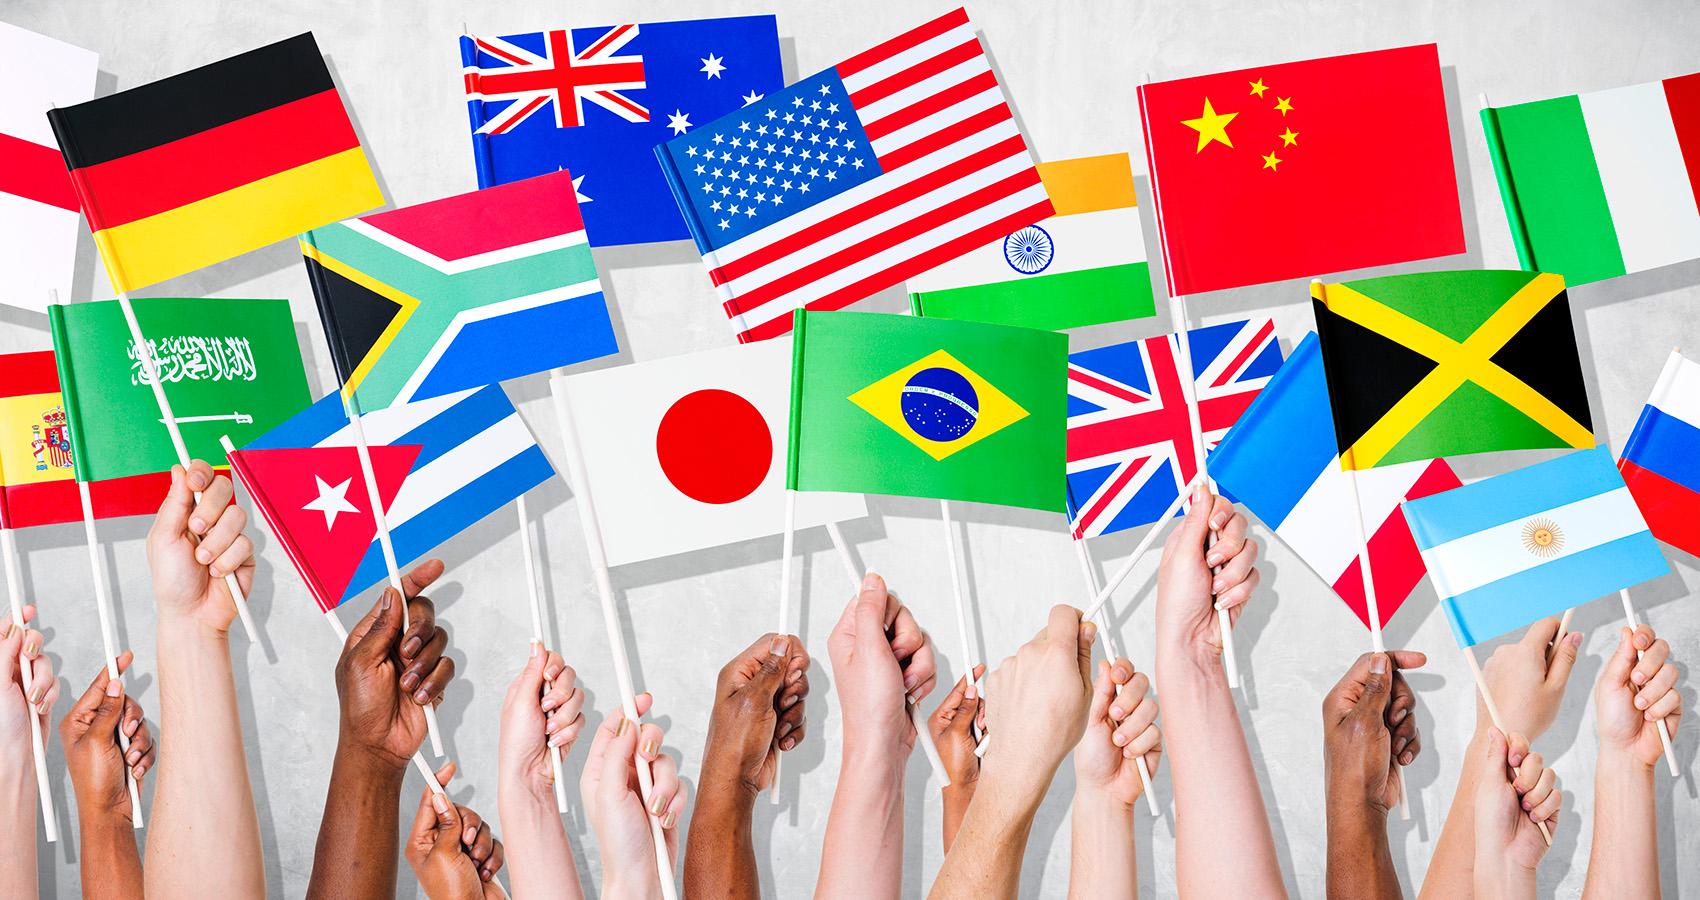 stock photo of hands holding flags from different countries